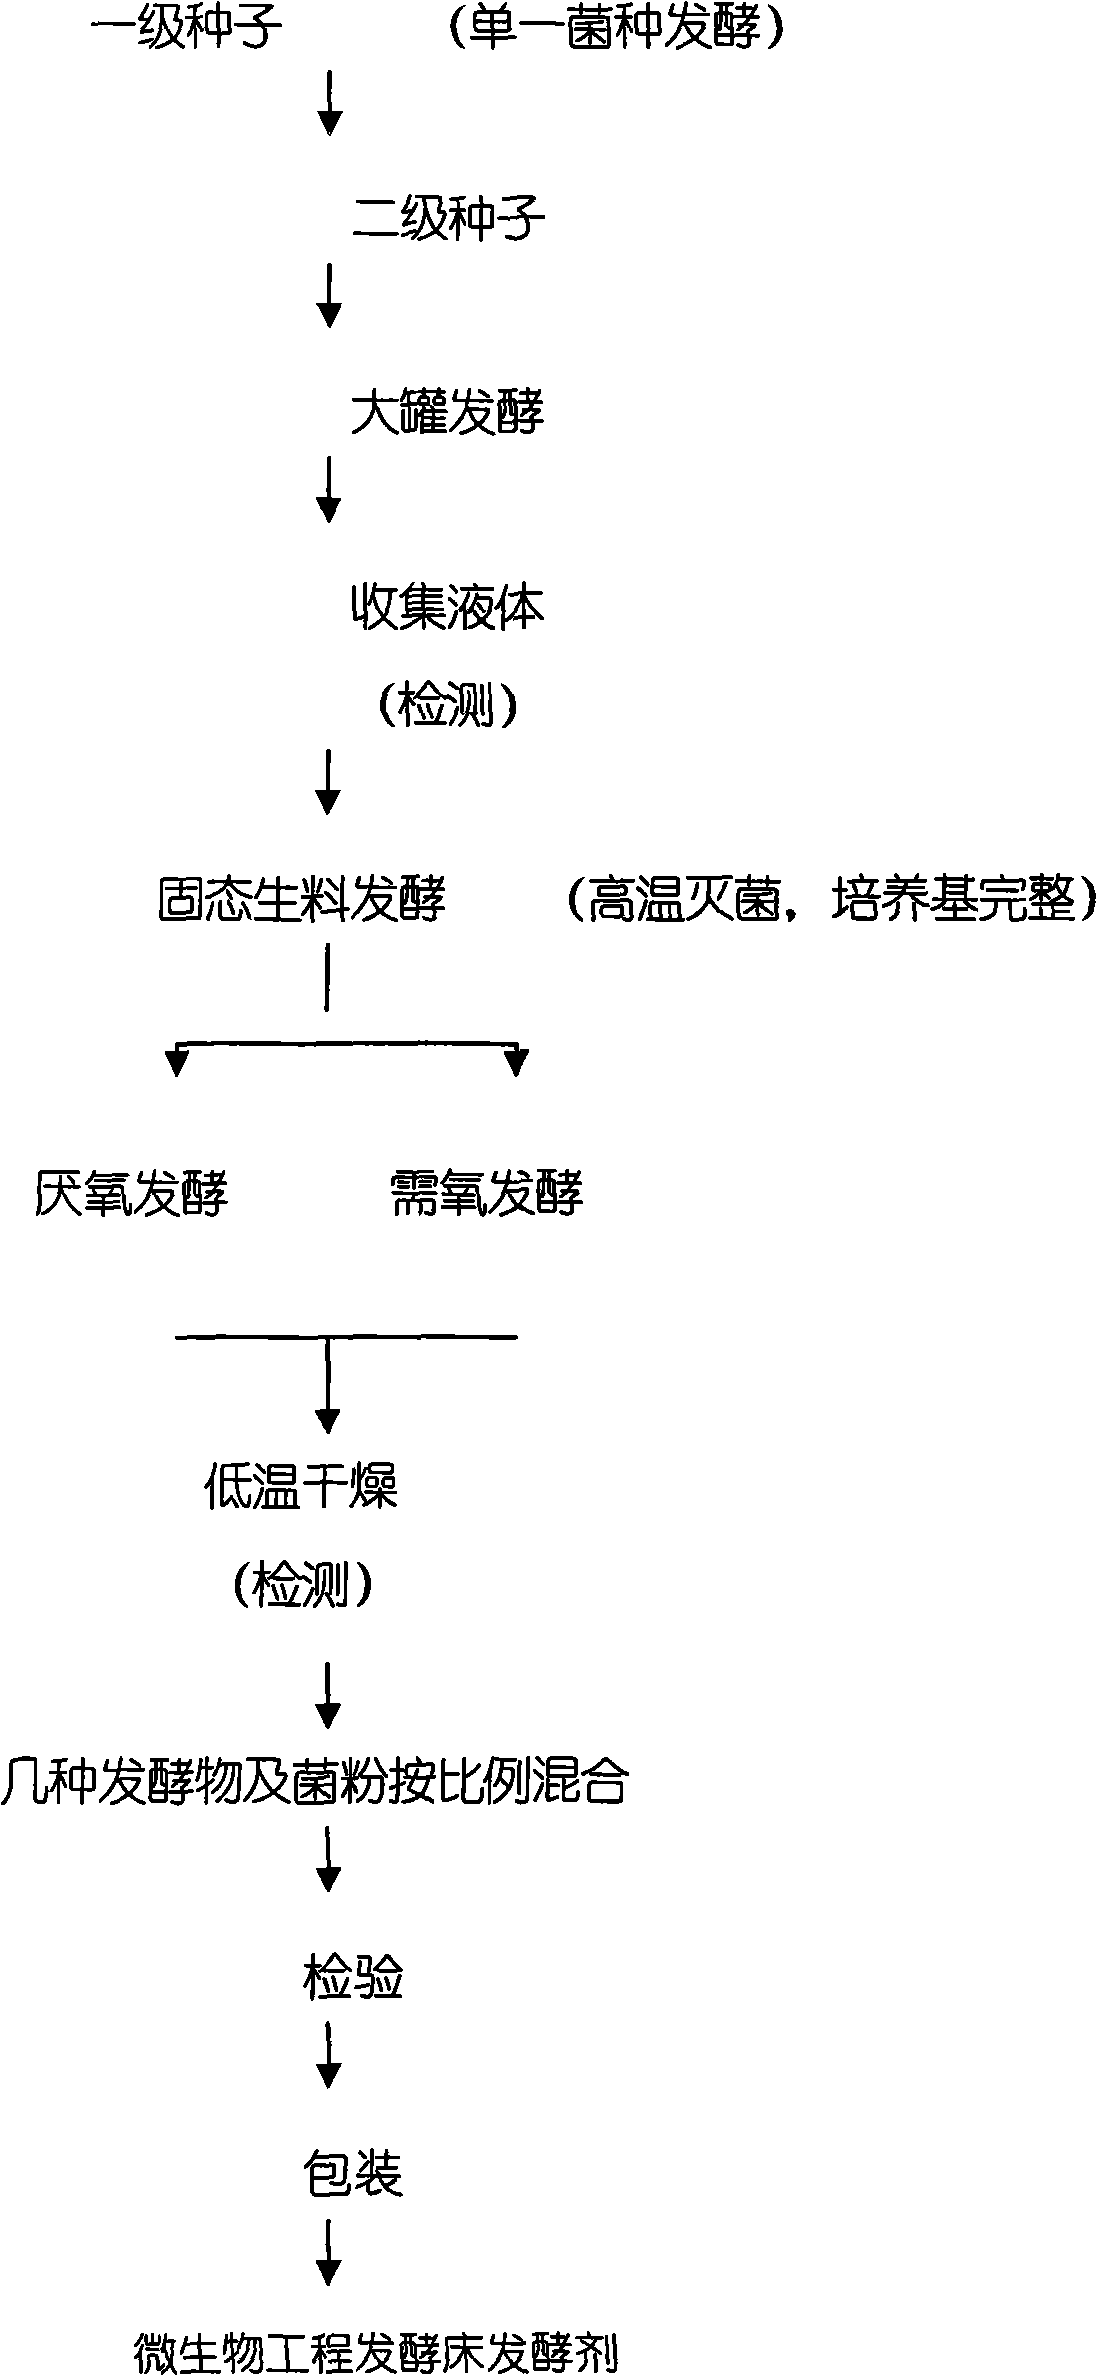 A leaven dedicated for fermenting bed of microorganism engineering and fermenting bed pad manufacture method